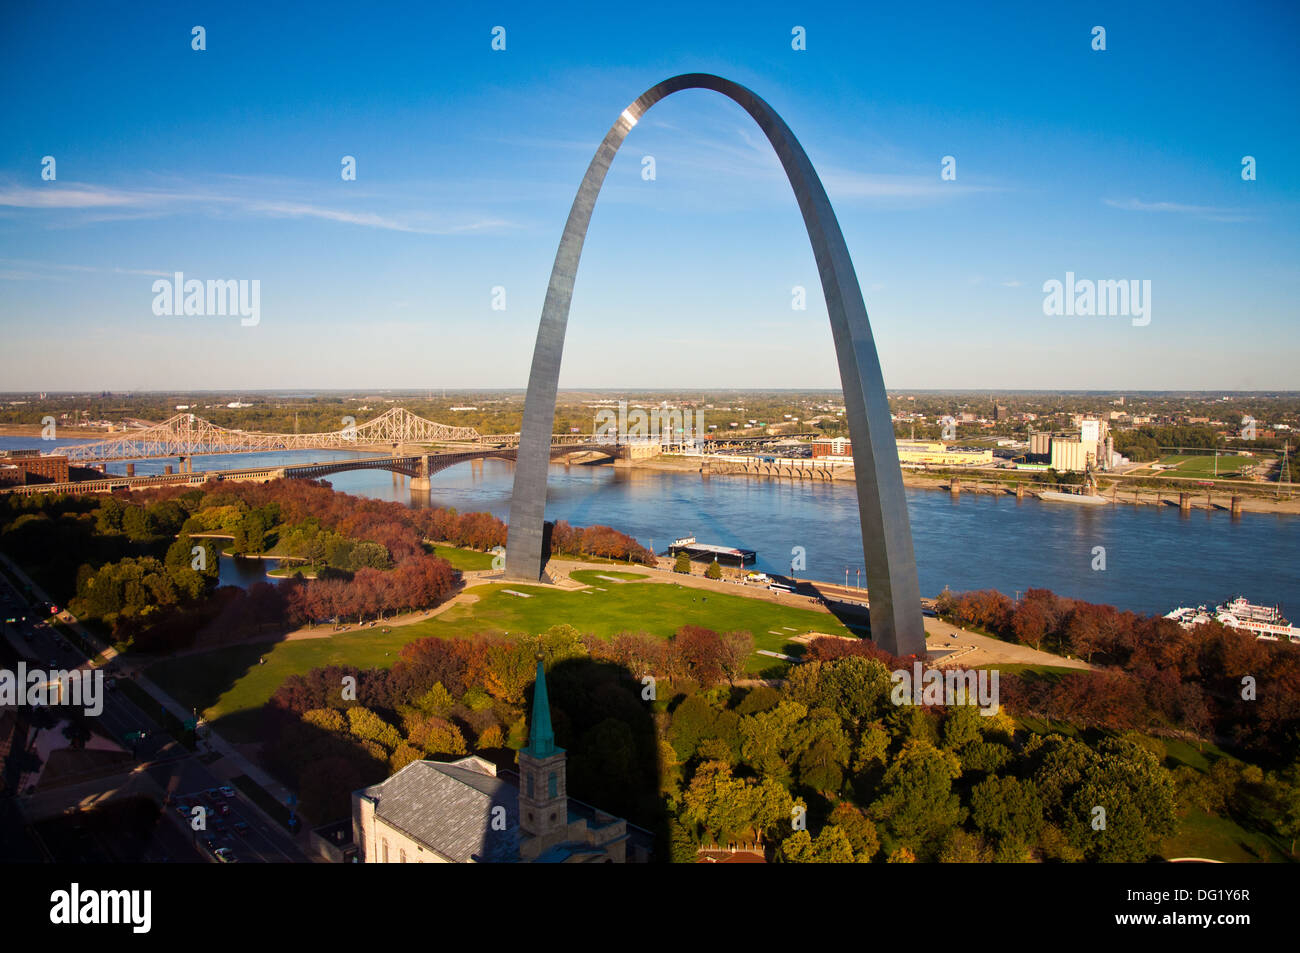 Image of the St. Louis Gateway Arch in St. Louis, MO. Stock Photo